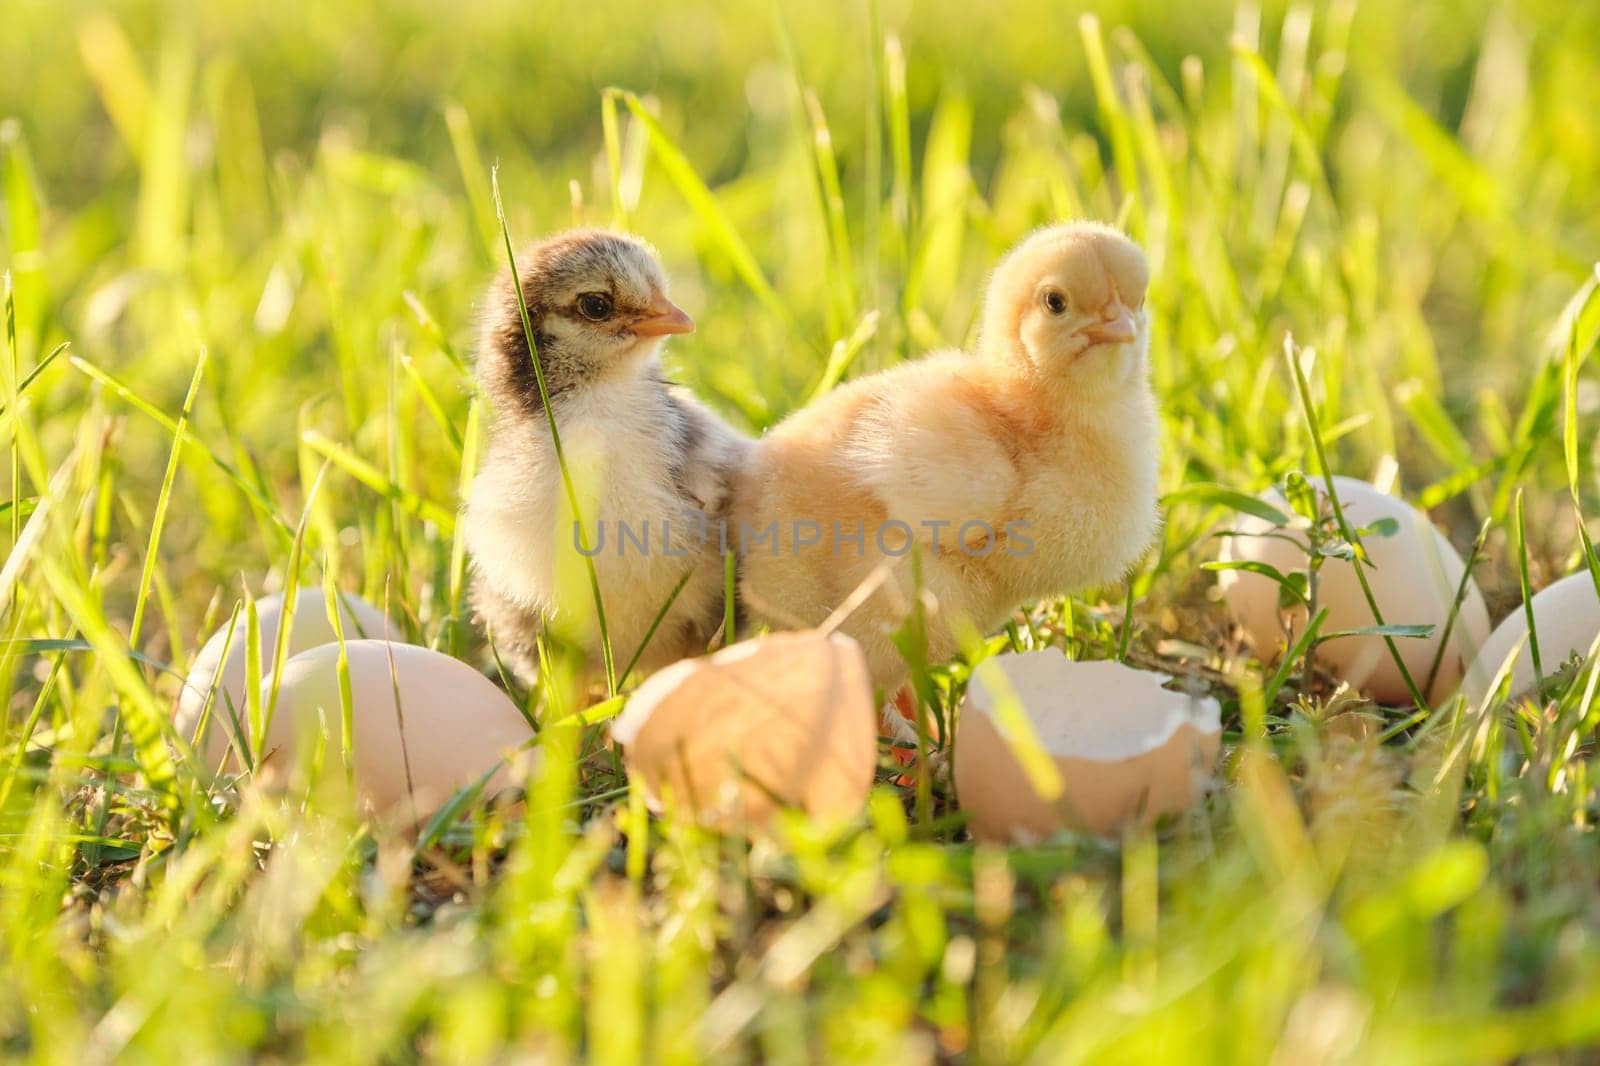 Two newborn chicken with cracked eggshell eggs. Sunny grass background, golden hour, country rustic style